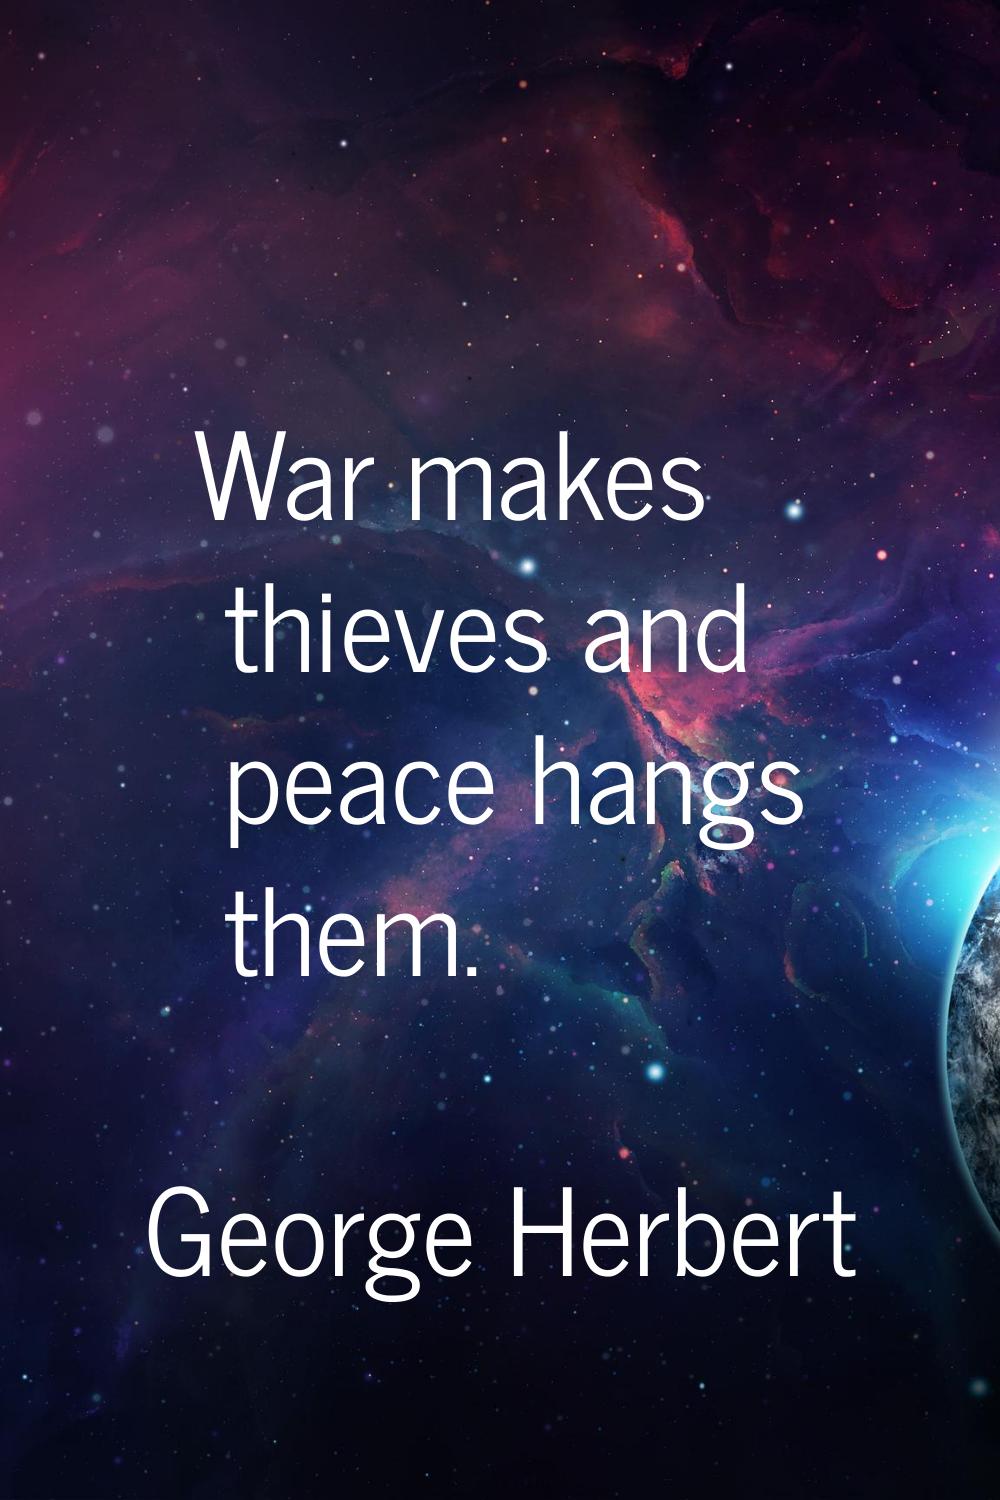 War makes thieves and peace hangs them.